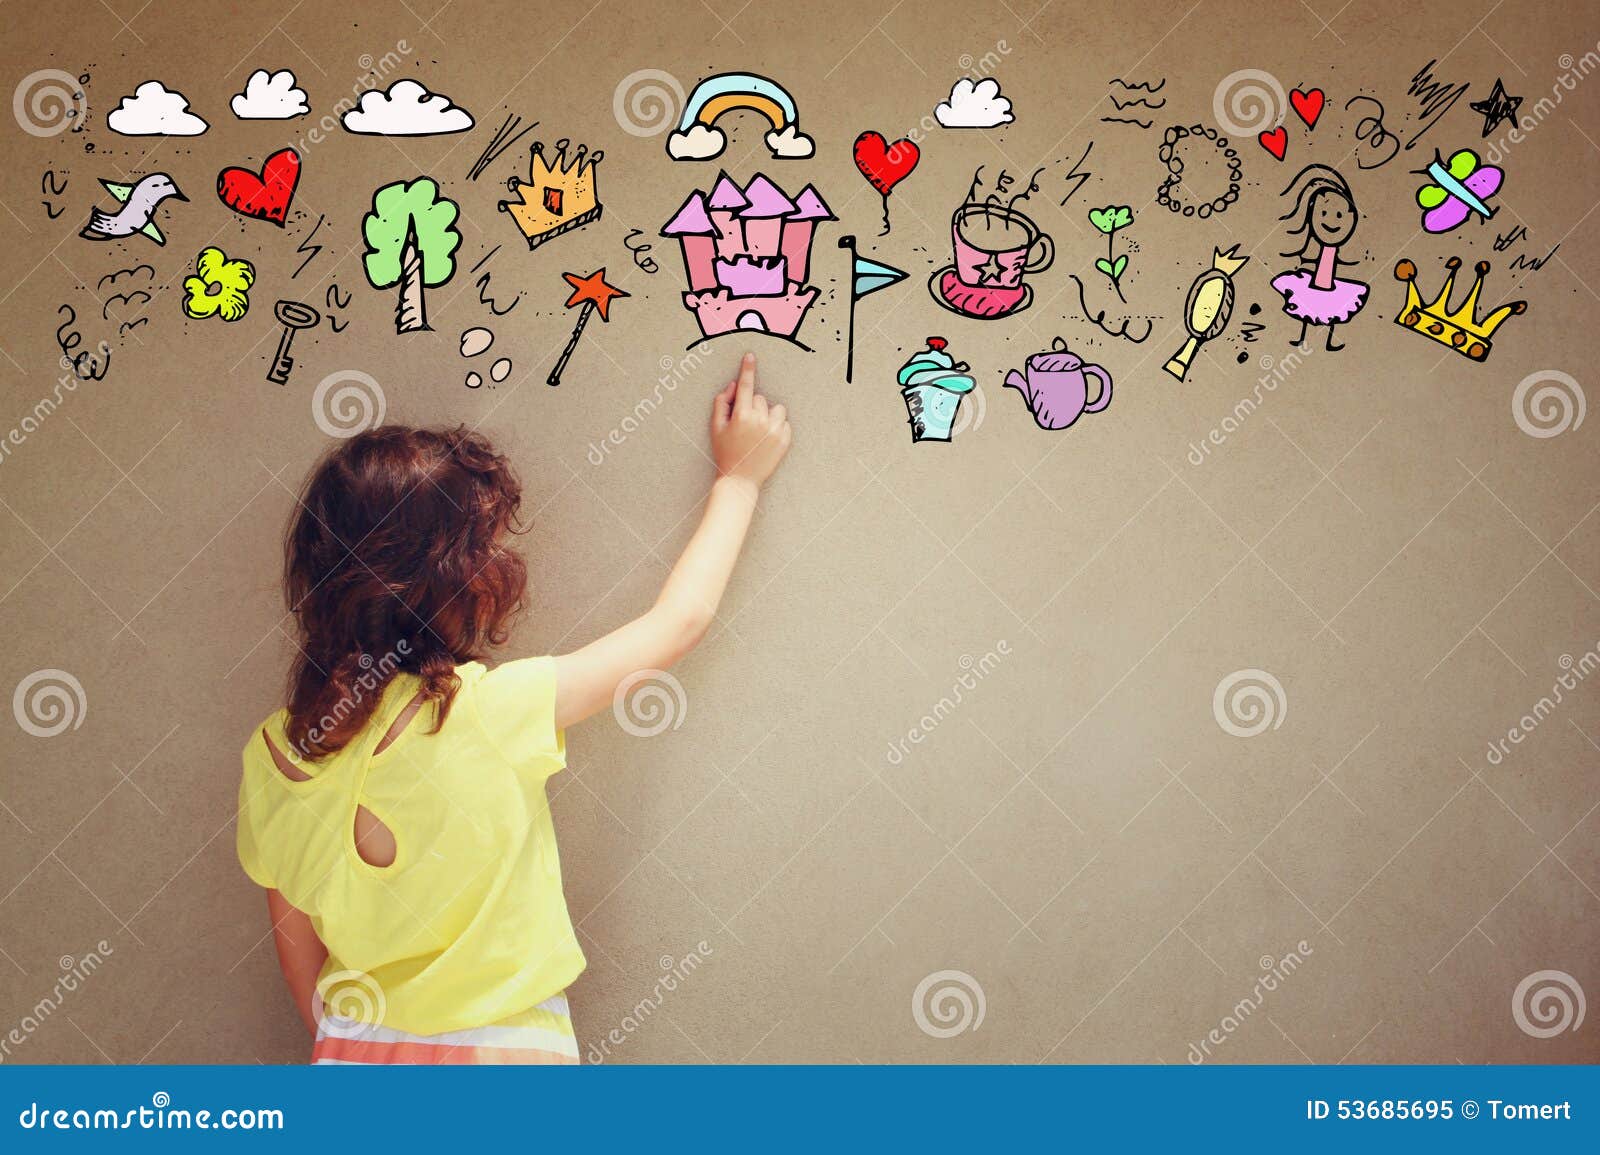 photo of cute kid imagine princess or fairytale fantasy. set of infographics over textured wall background